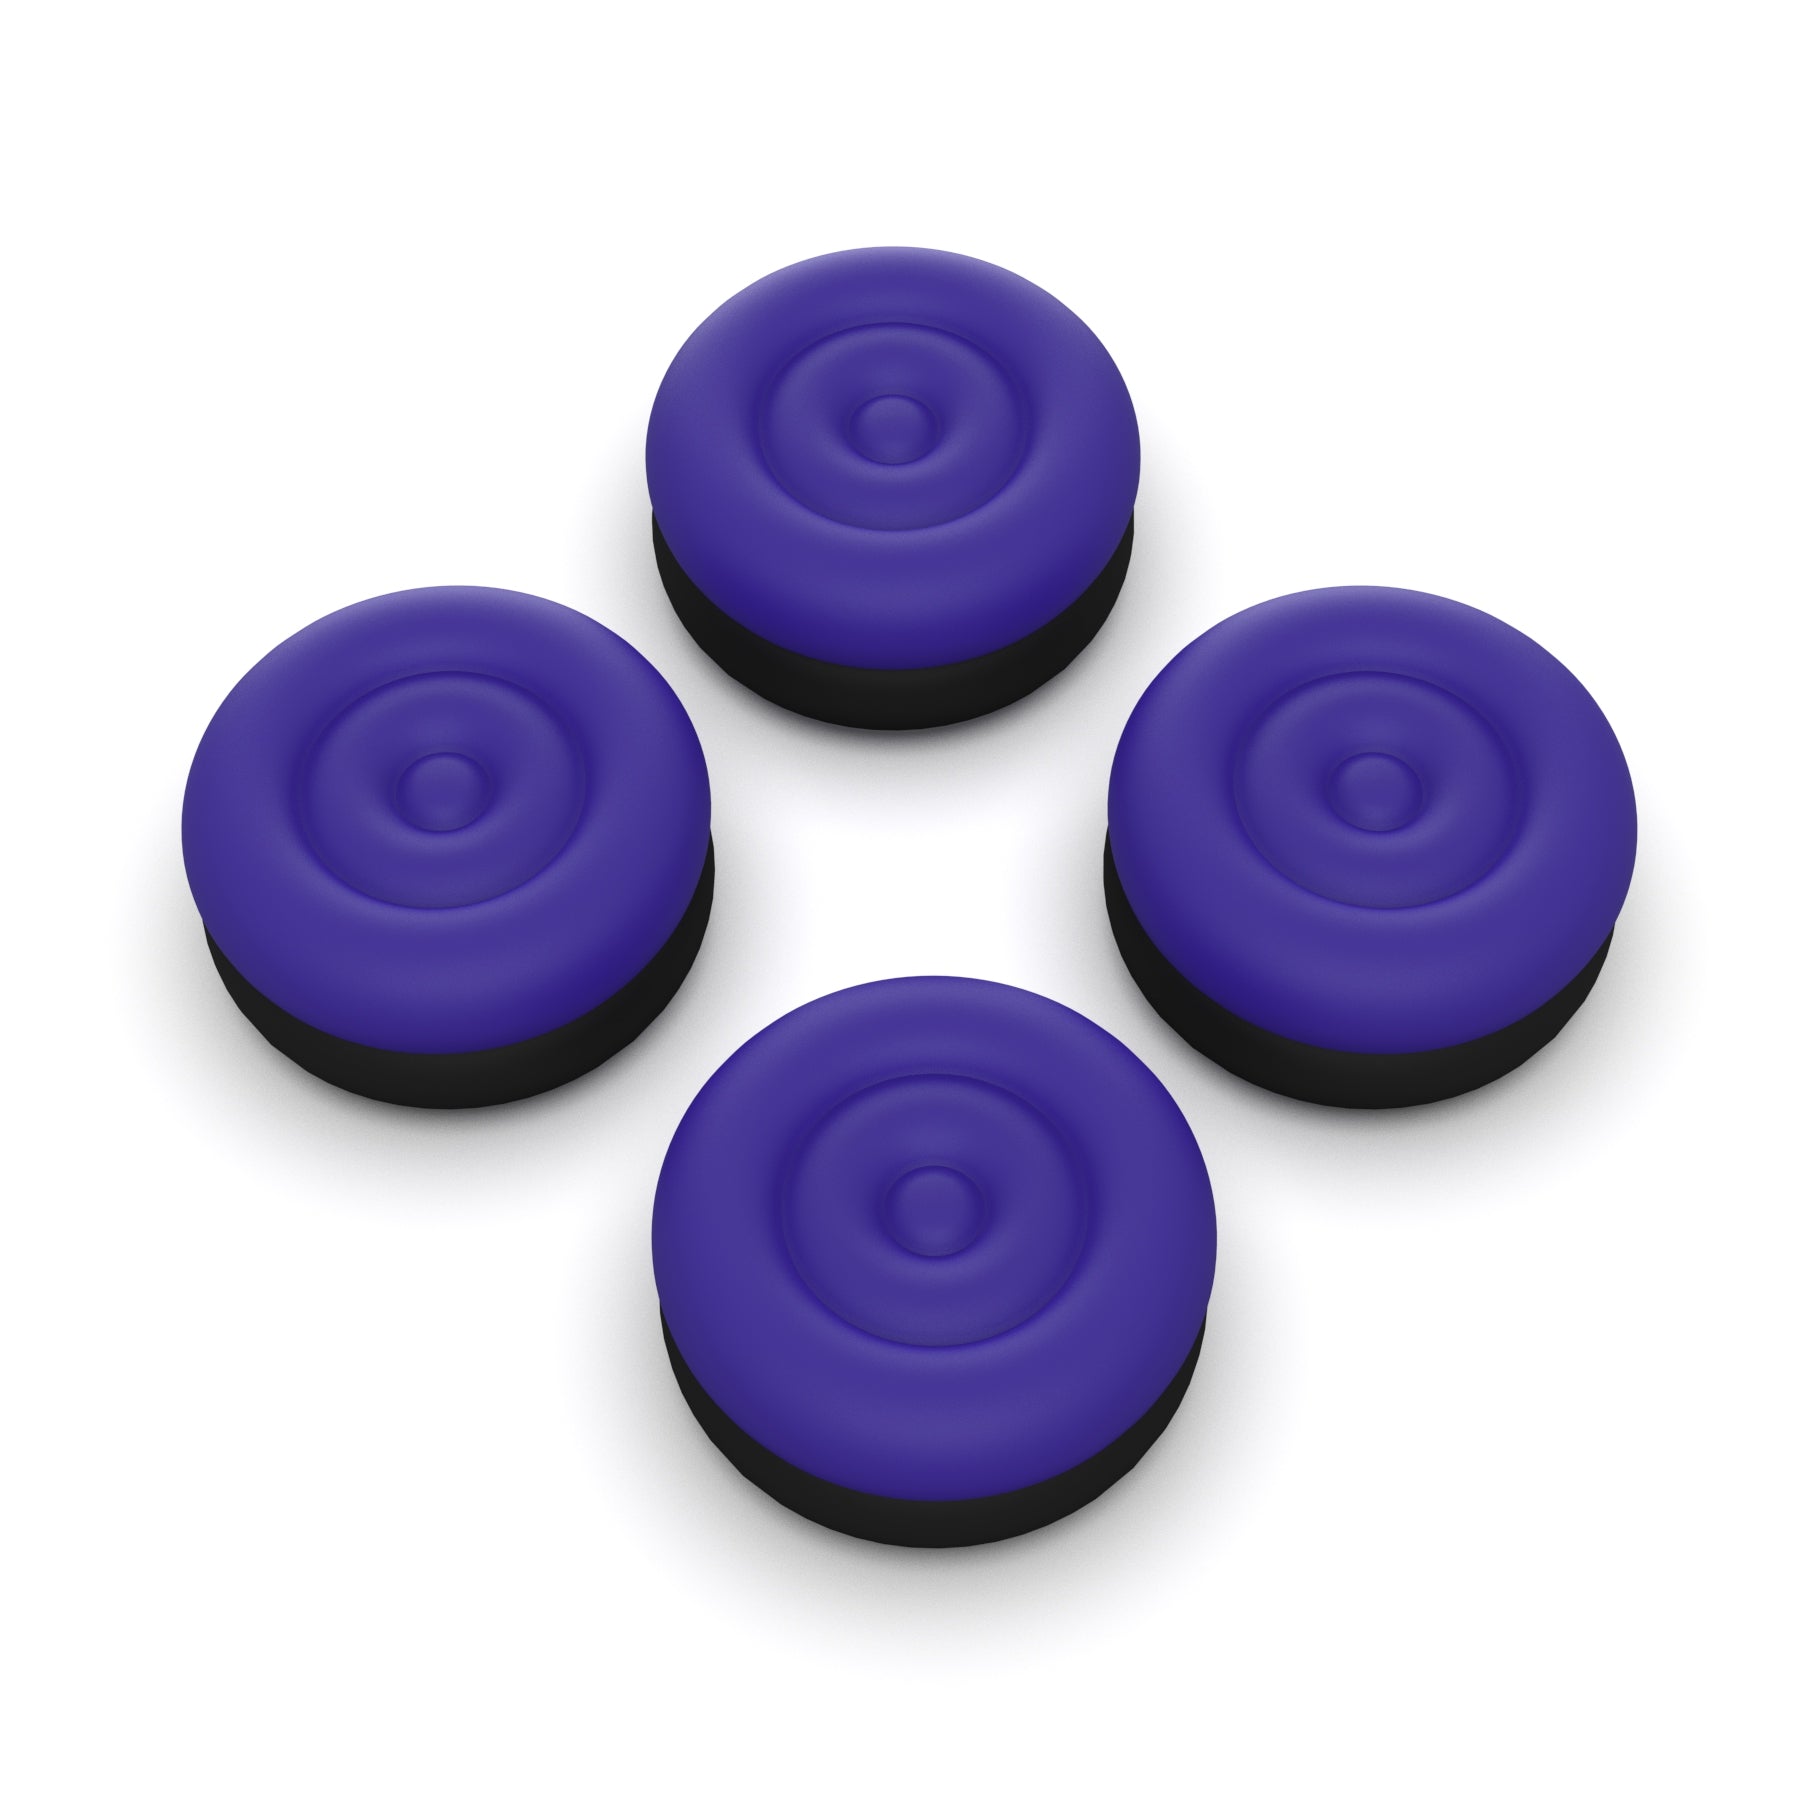 PlayVital Thumbs Cushion Caps Thumb Grips for ps5, for ps4, Thumbstick Grip Cover for Xbox Series X/S, Thumb Grip Caps for Xbox One, Elite Series 2, for Switch Pro Controller - Galactic Purple & Black - PJM3043 PlayVital